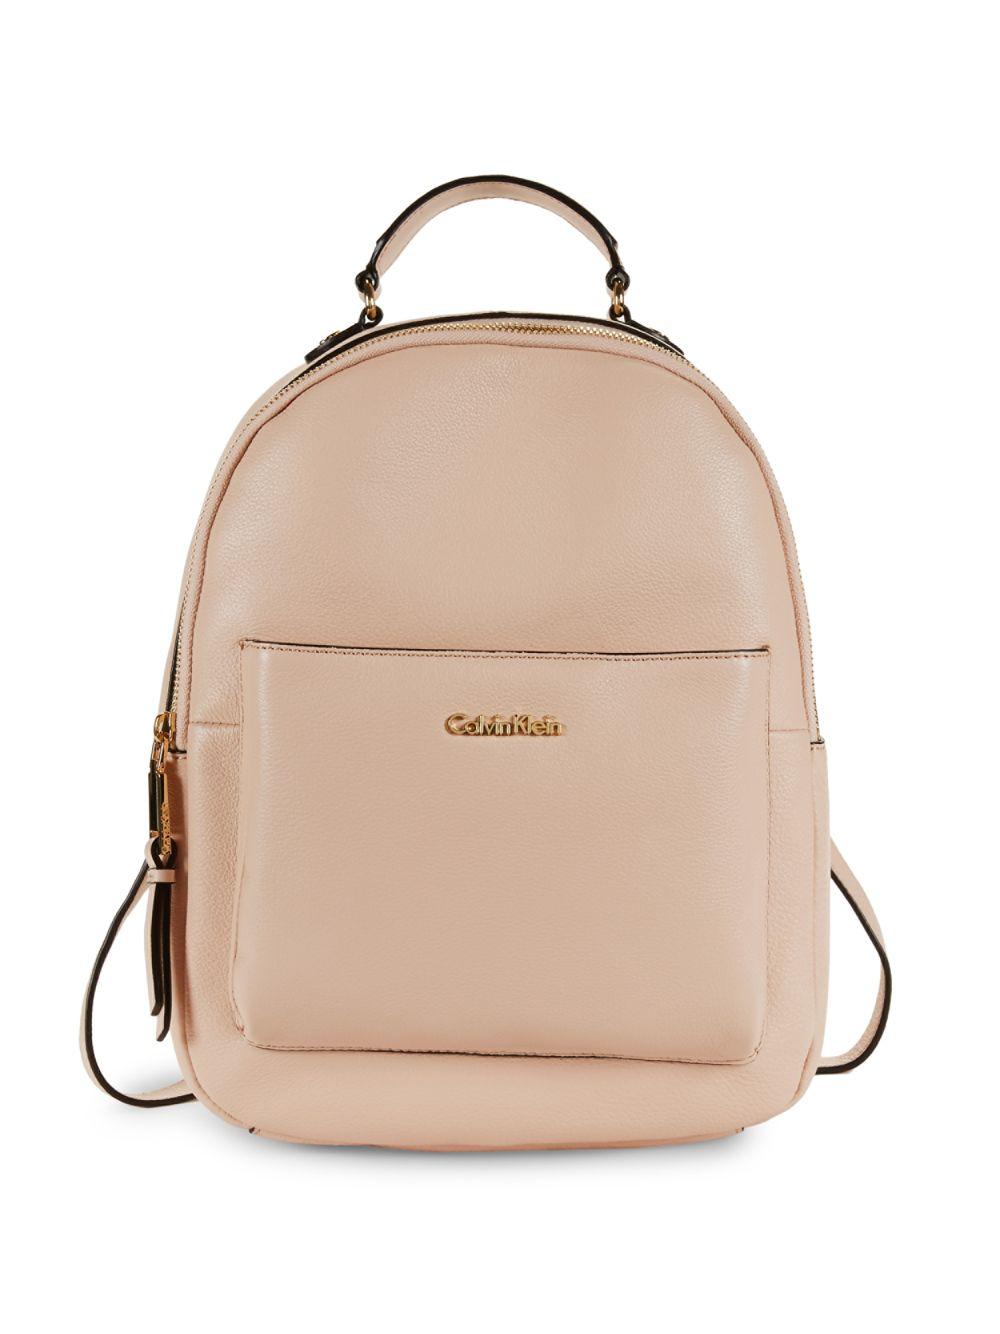 calvin klein dome backpack for Sale OFF 63%